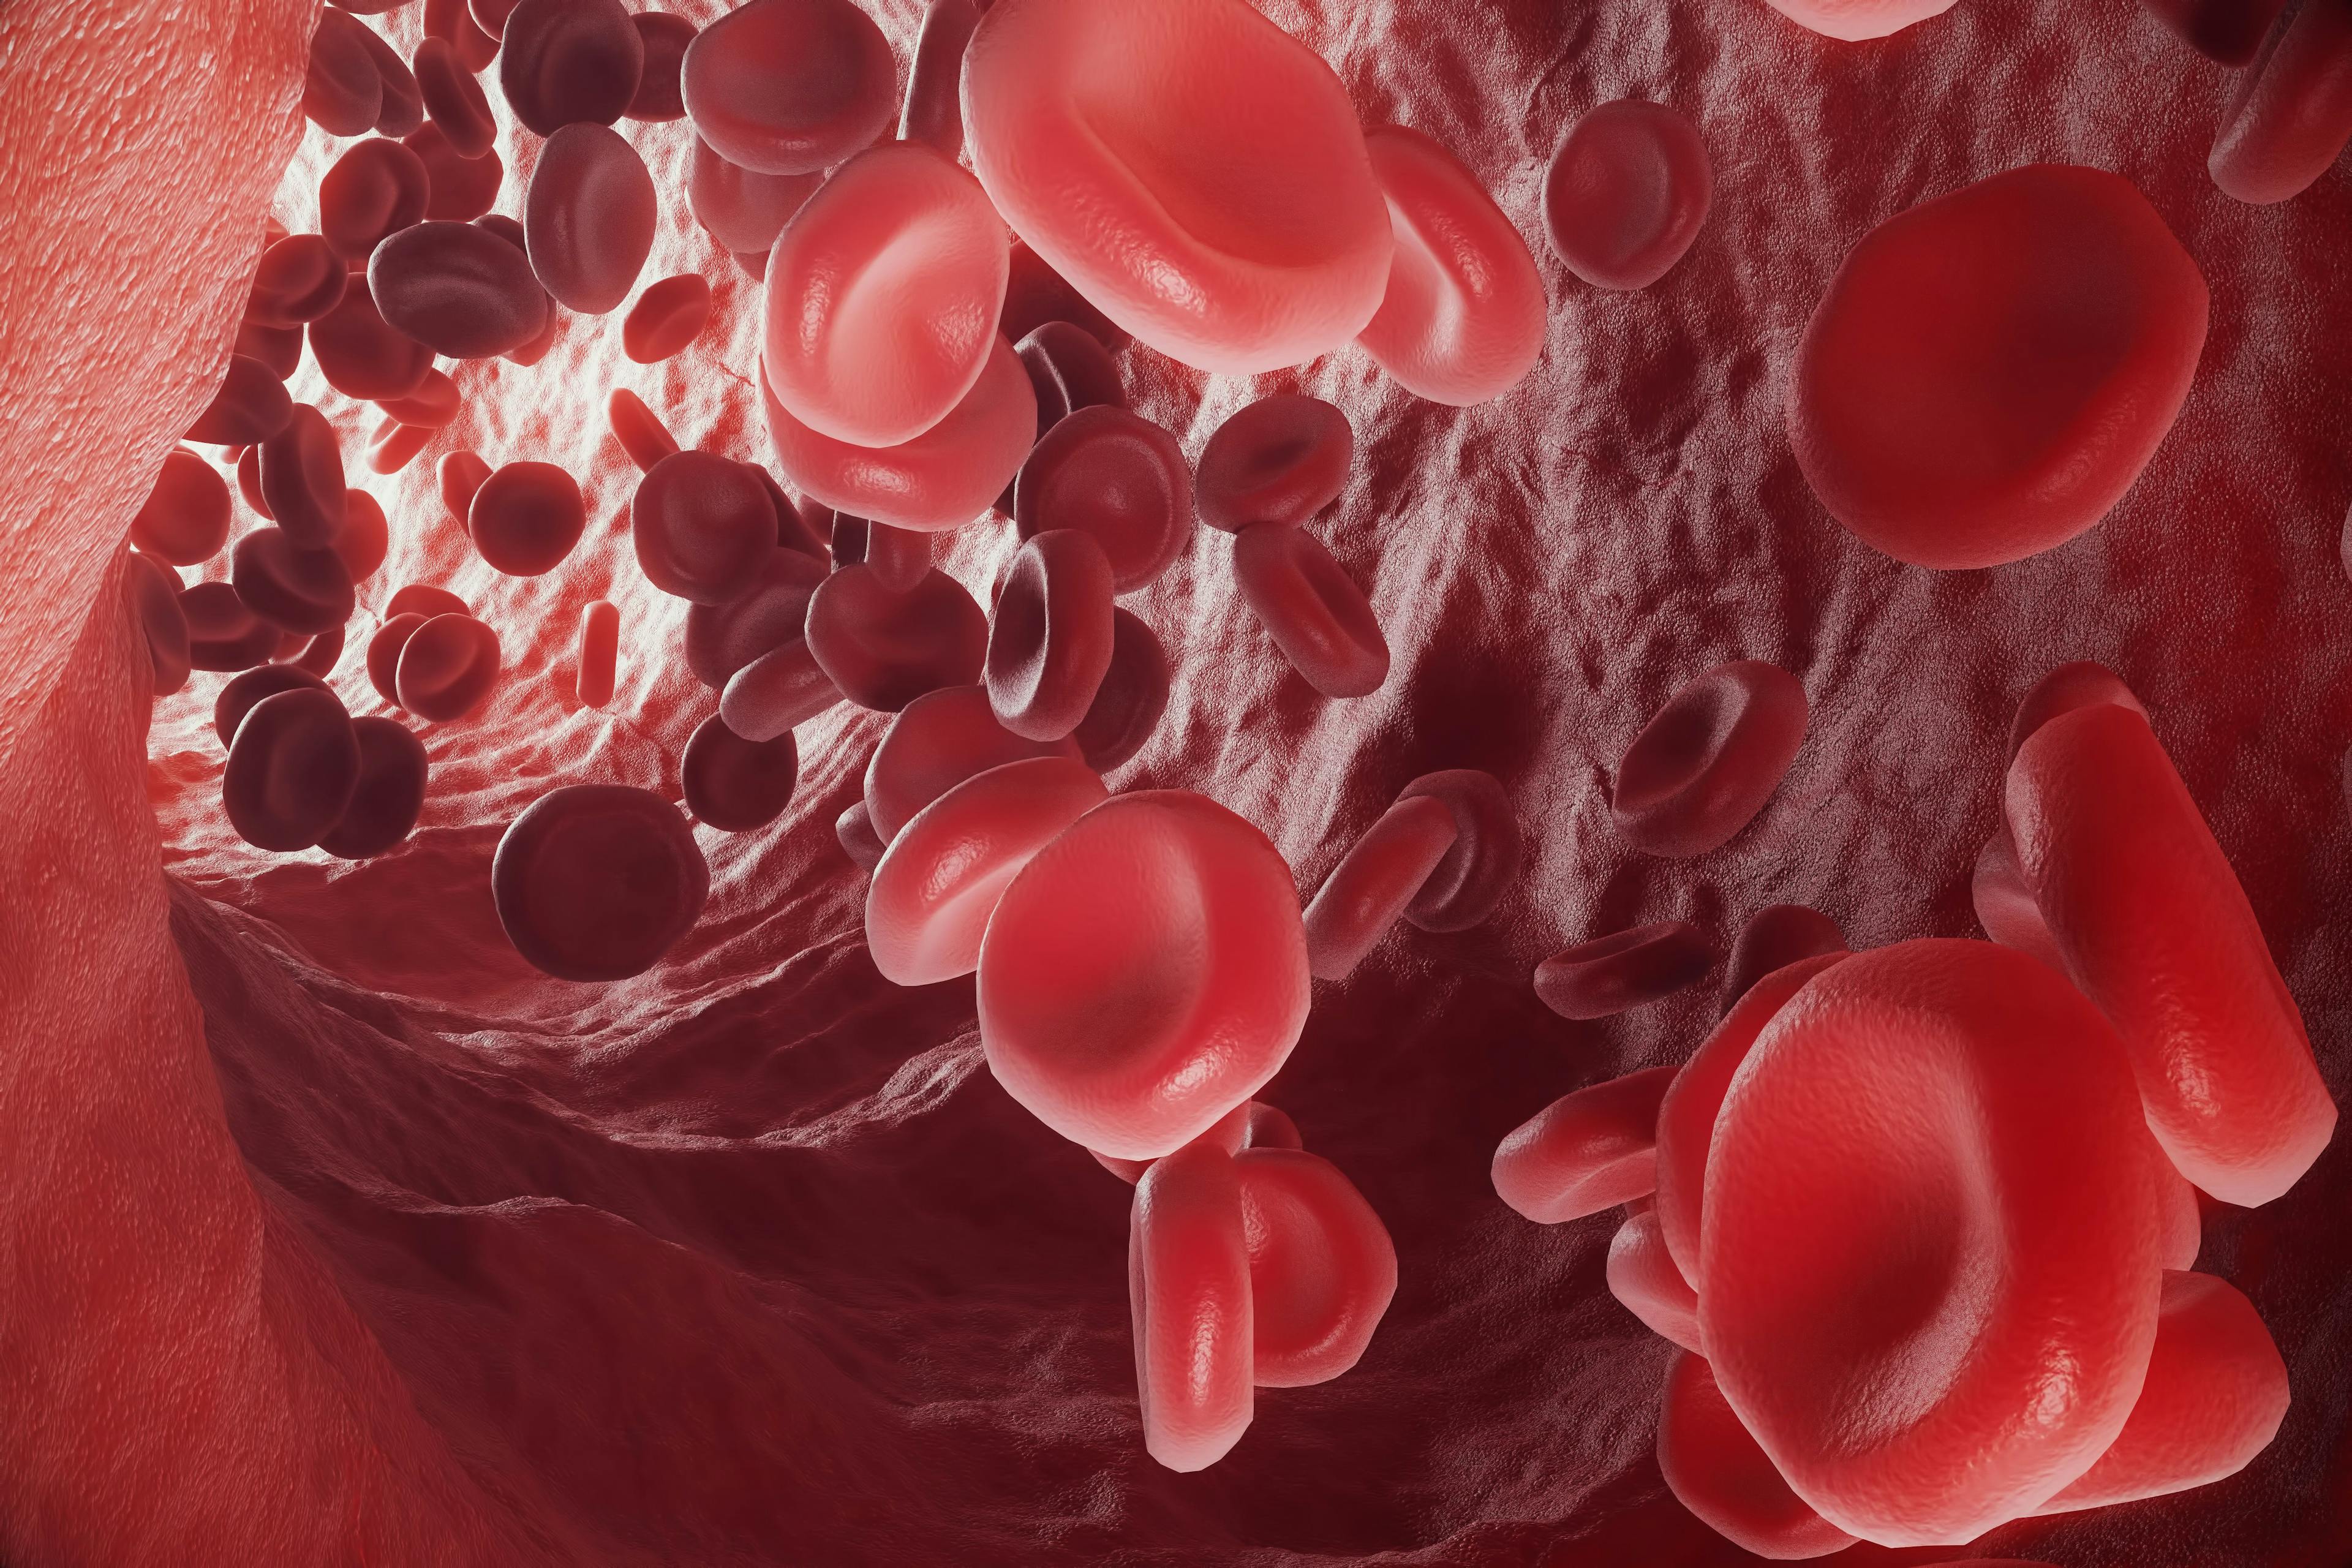 As more novel therapeutic targets are discovered in patients with chronic lymphocytic leukemia, the more possibilities are presented in terms of treatment with targeted agents, small molecules, and cellular therapies.